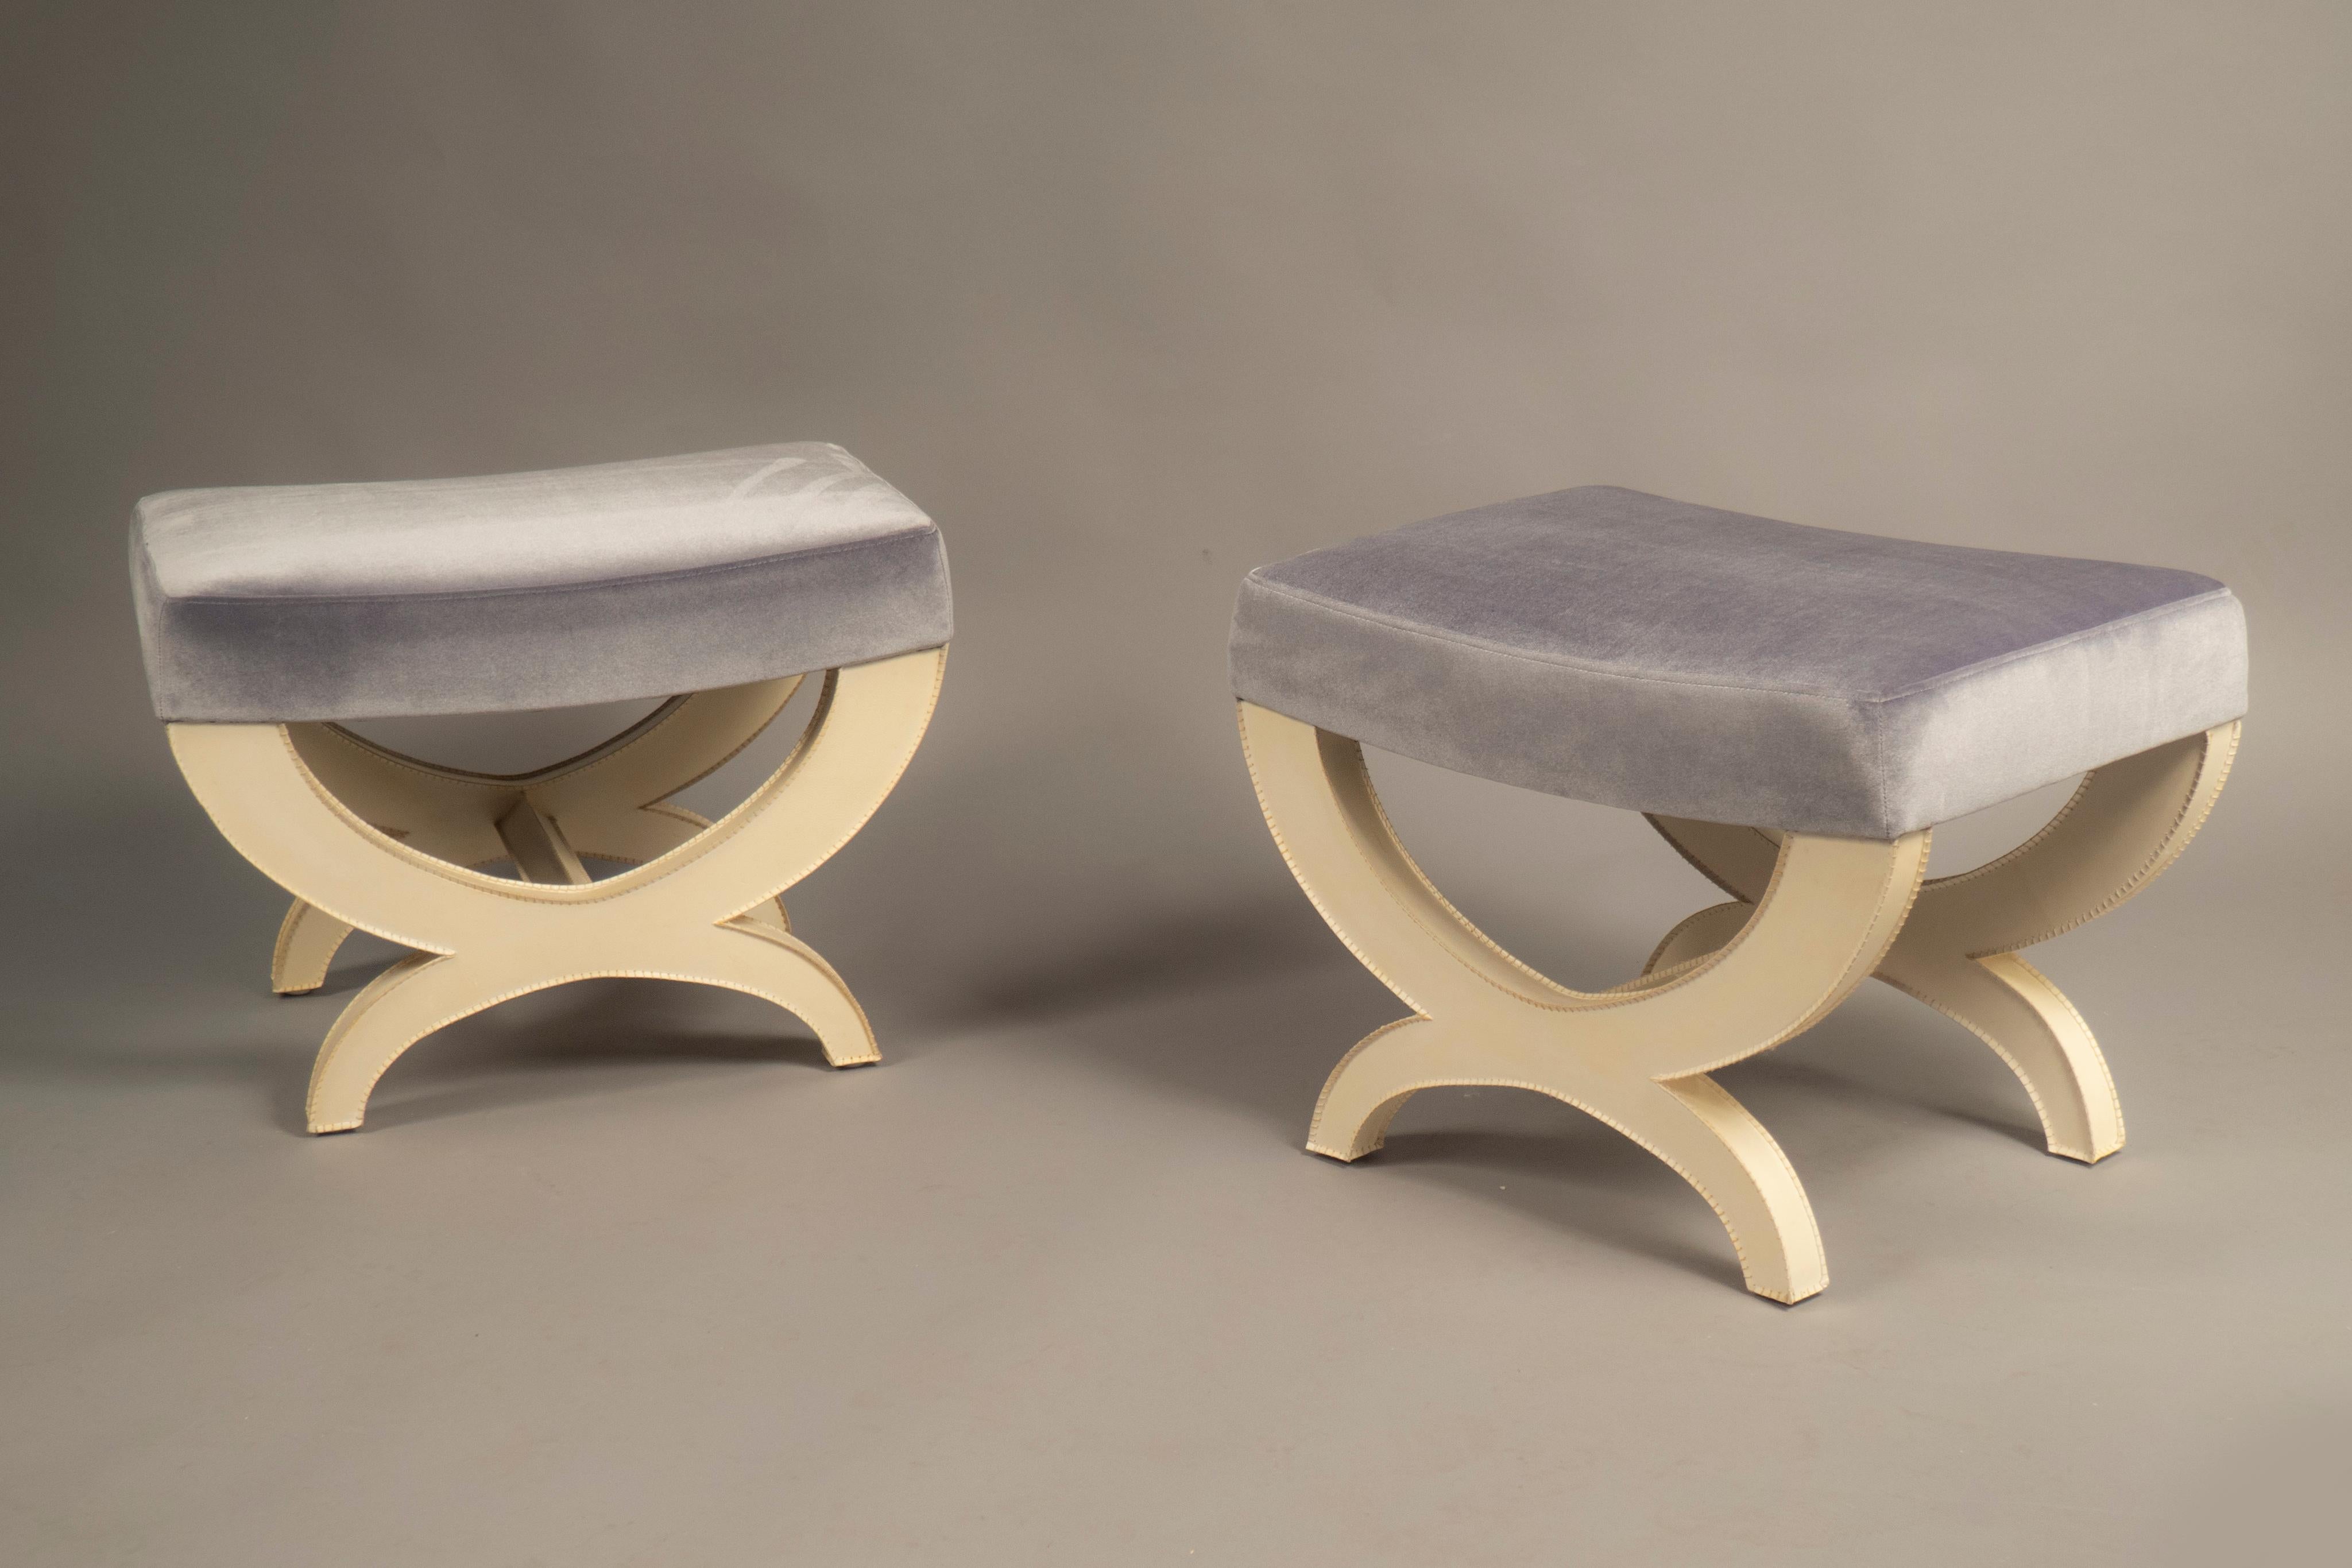 Hand-Crafted Pair of Parchment Stools, USA, 2019